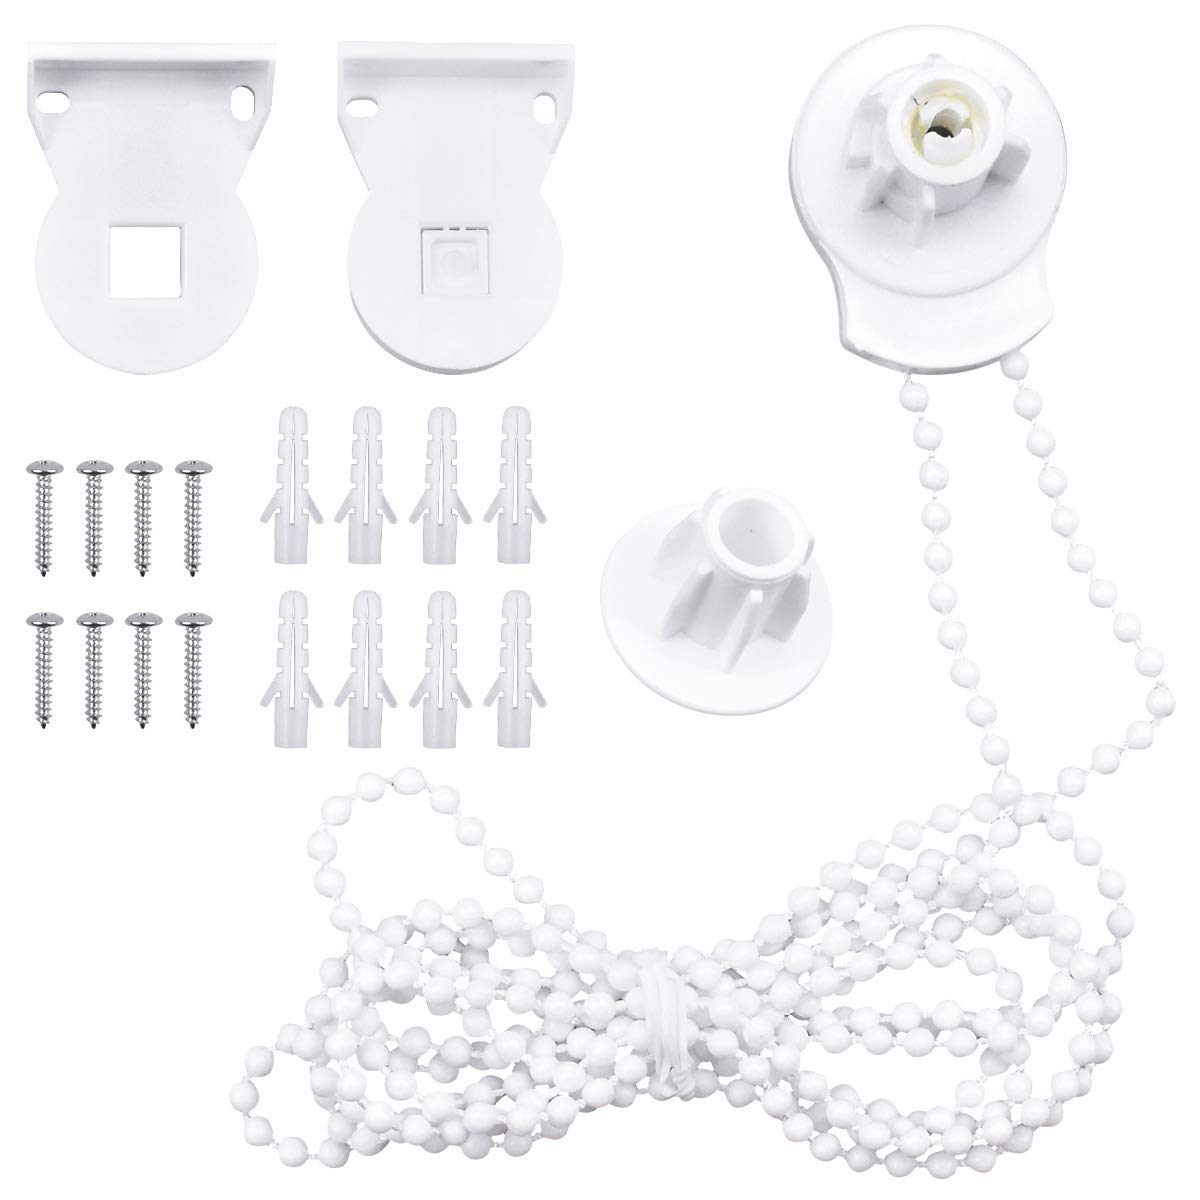 Roller Blind Fittings, 25mm Roller Blind Brackets, Plastic Rolling Blind Replacement Repair Kit, Curtain Roller Accessories with Beaded Chain & Screws for Windows